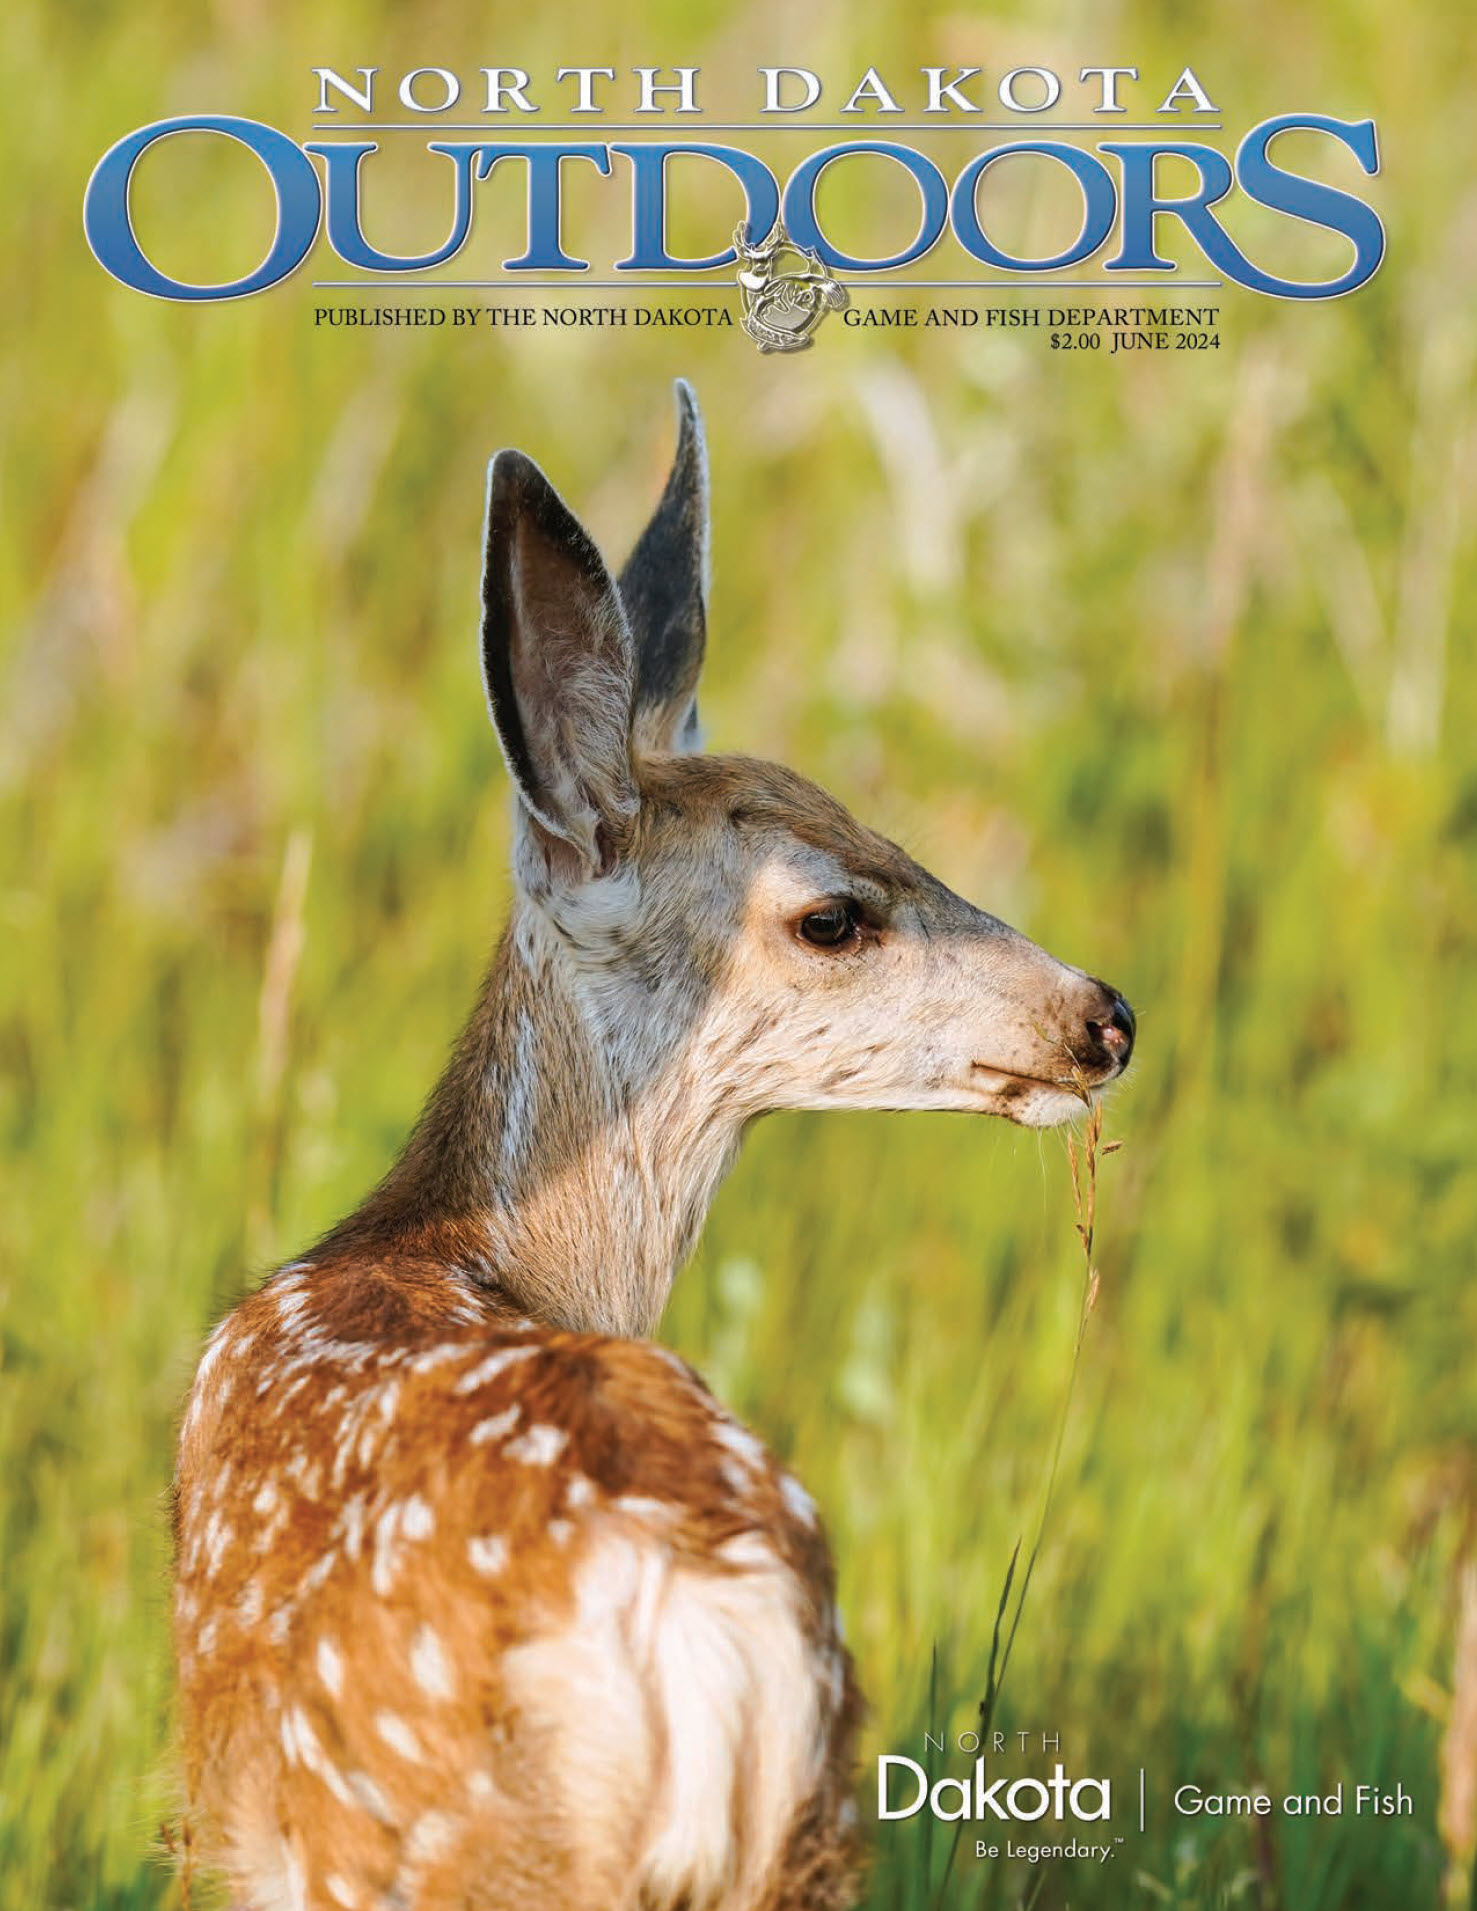 Magazine cover - mule deer fawn